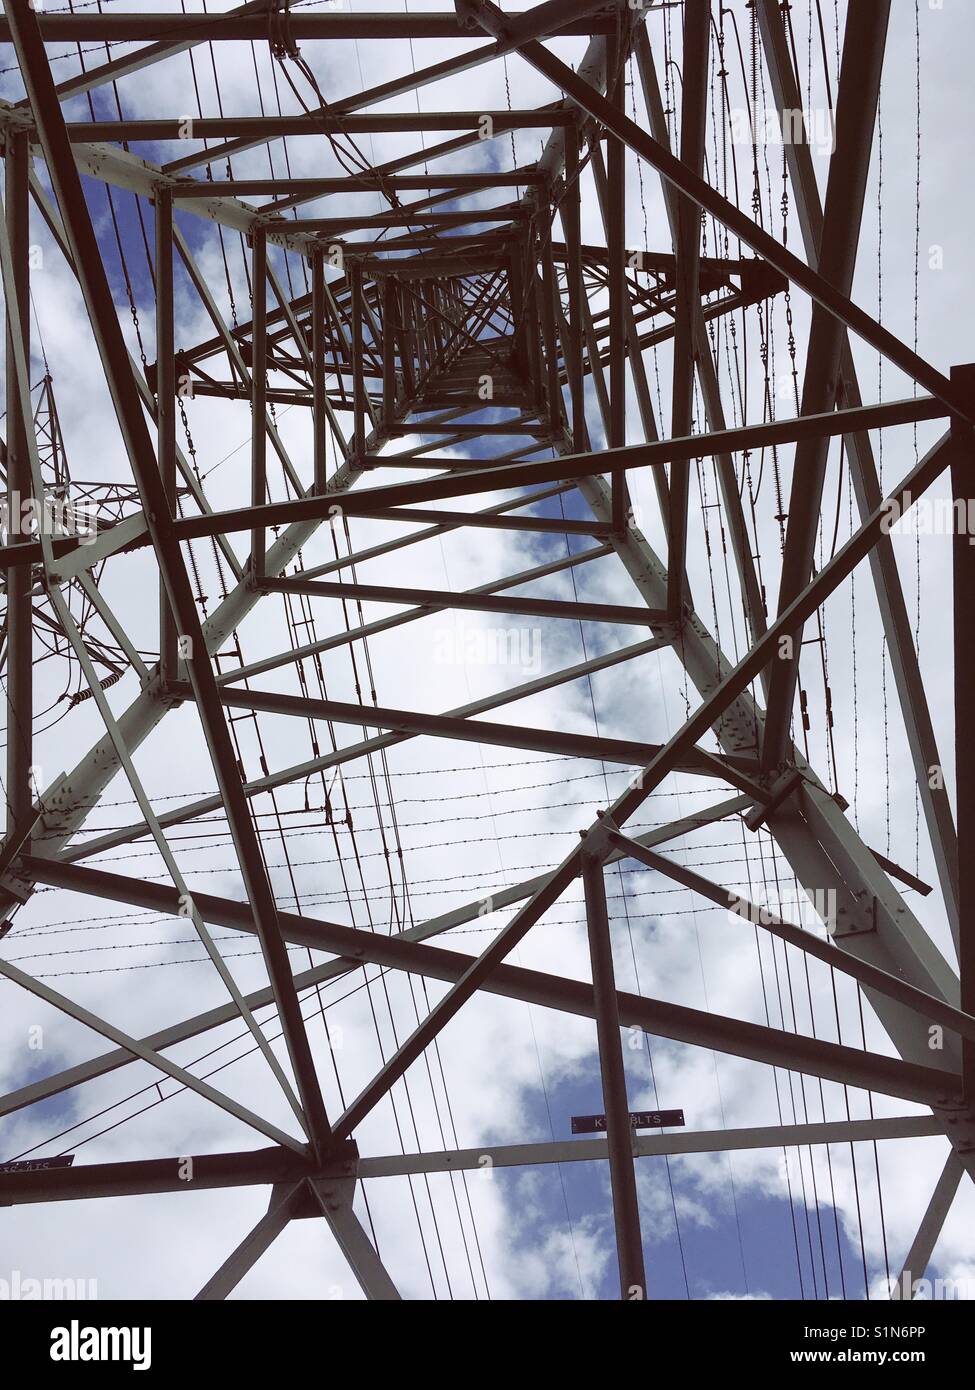 Looking up inside an electricity transmission tower from the ground on a cloudy day Stock Photo